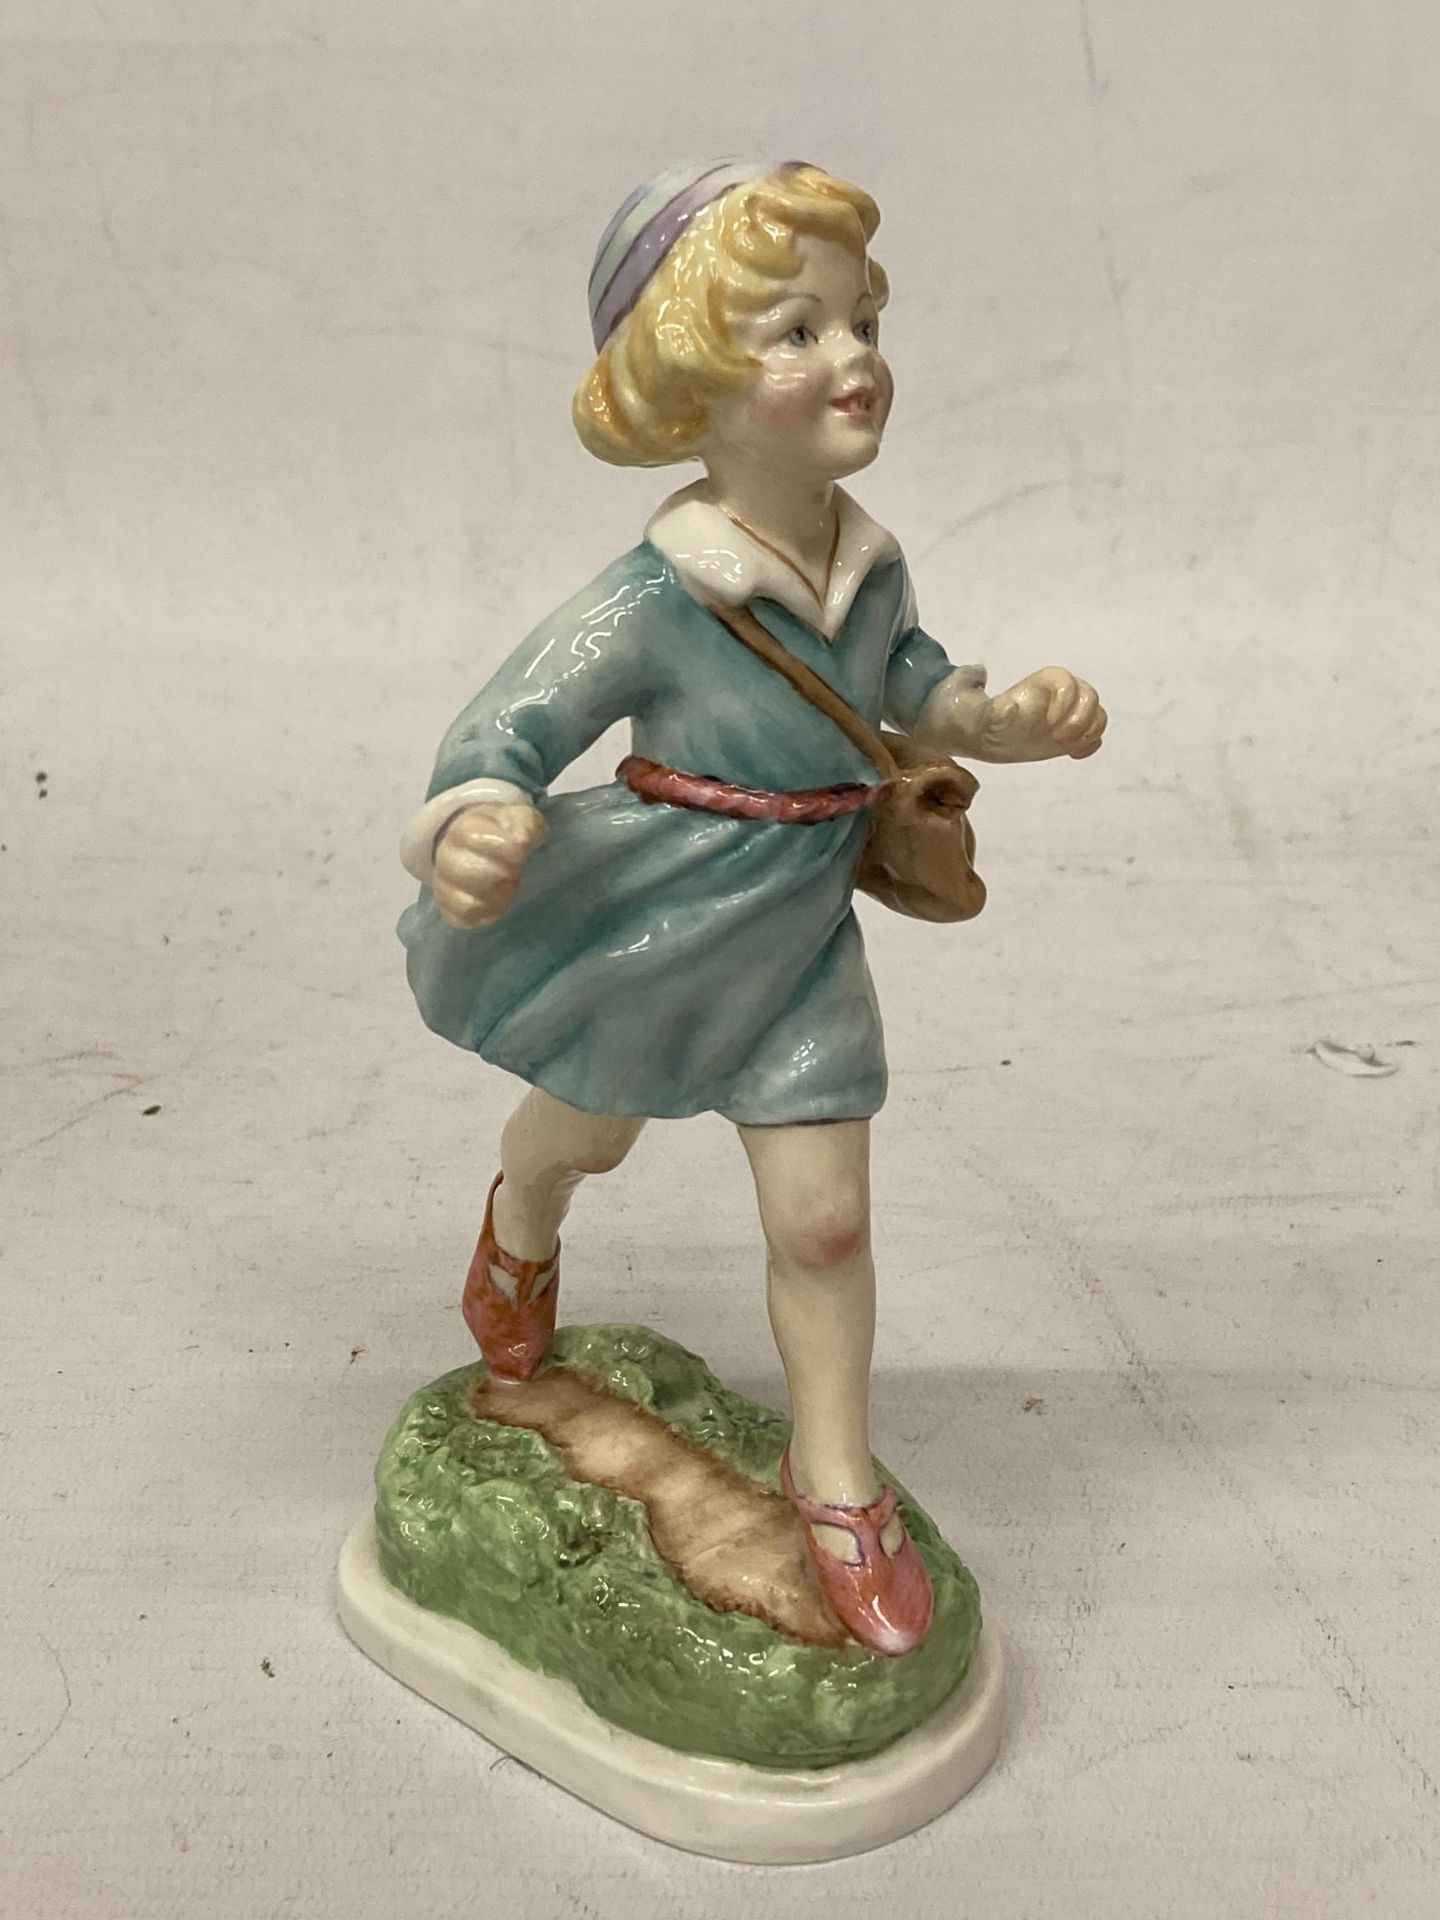 A ROYAL WORCESTER FIGURE "THURSDAY'S CHILD HAS FAR TO GO" 3522